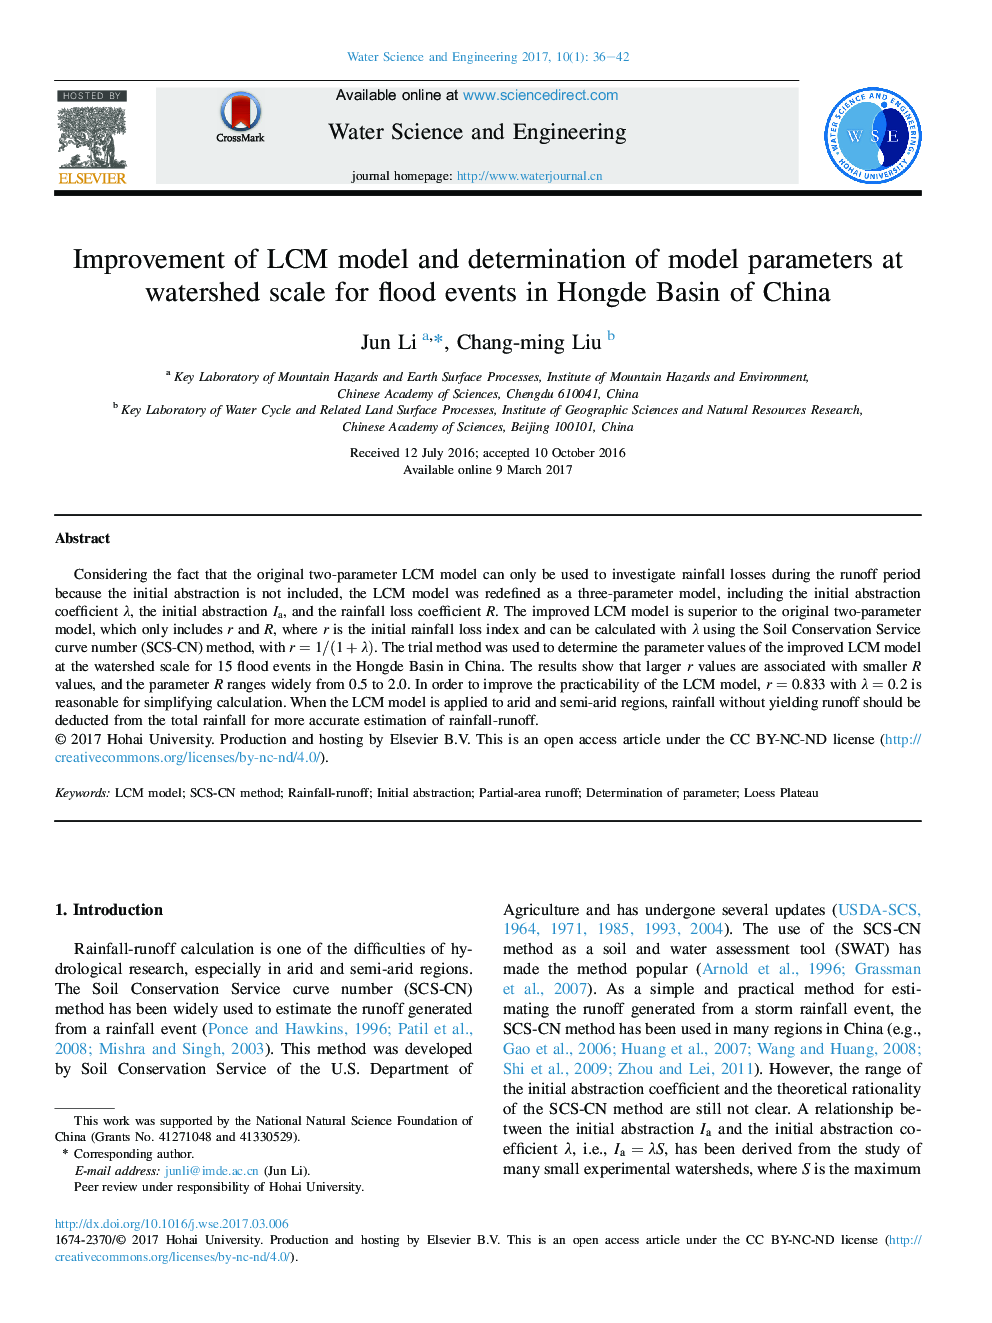 Improvement of LCM model and determination of model parameters at watershed scale for flood events in Hongde Basin of China